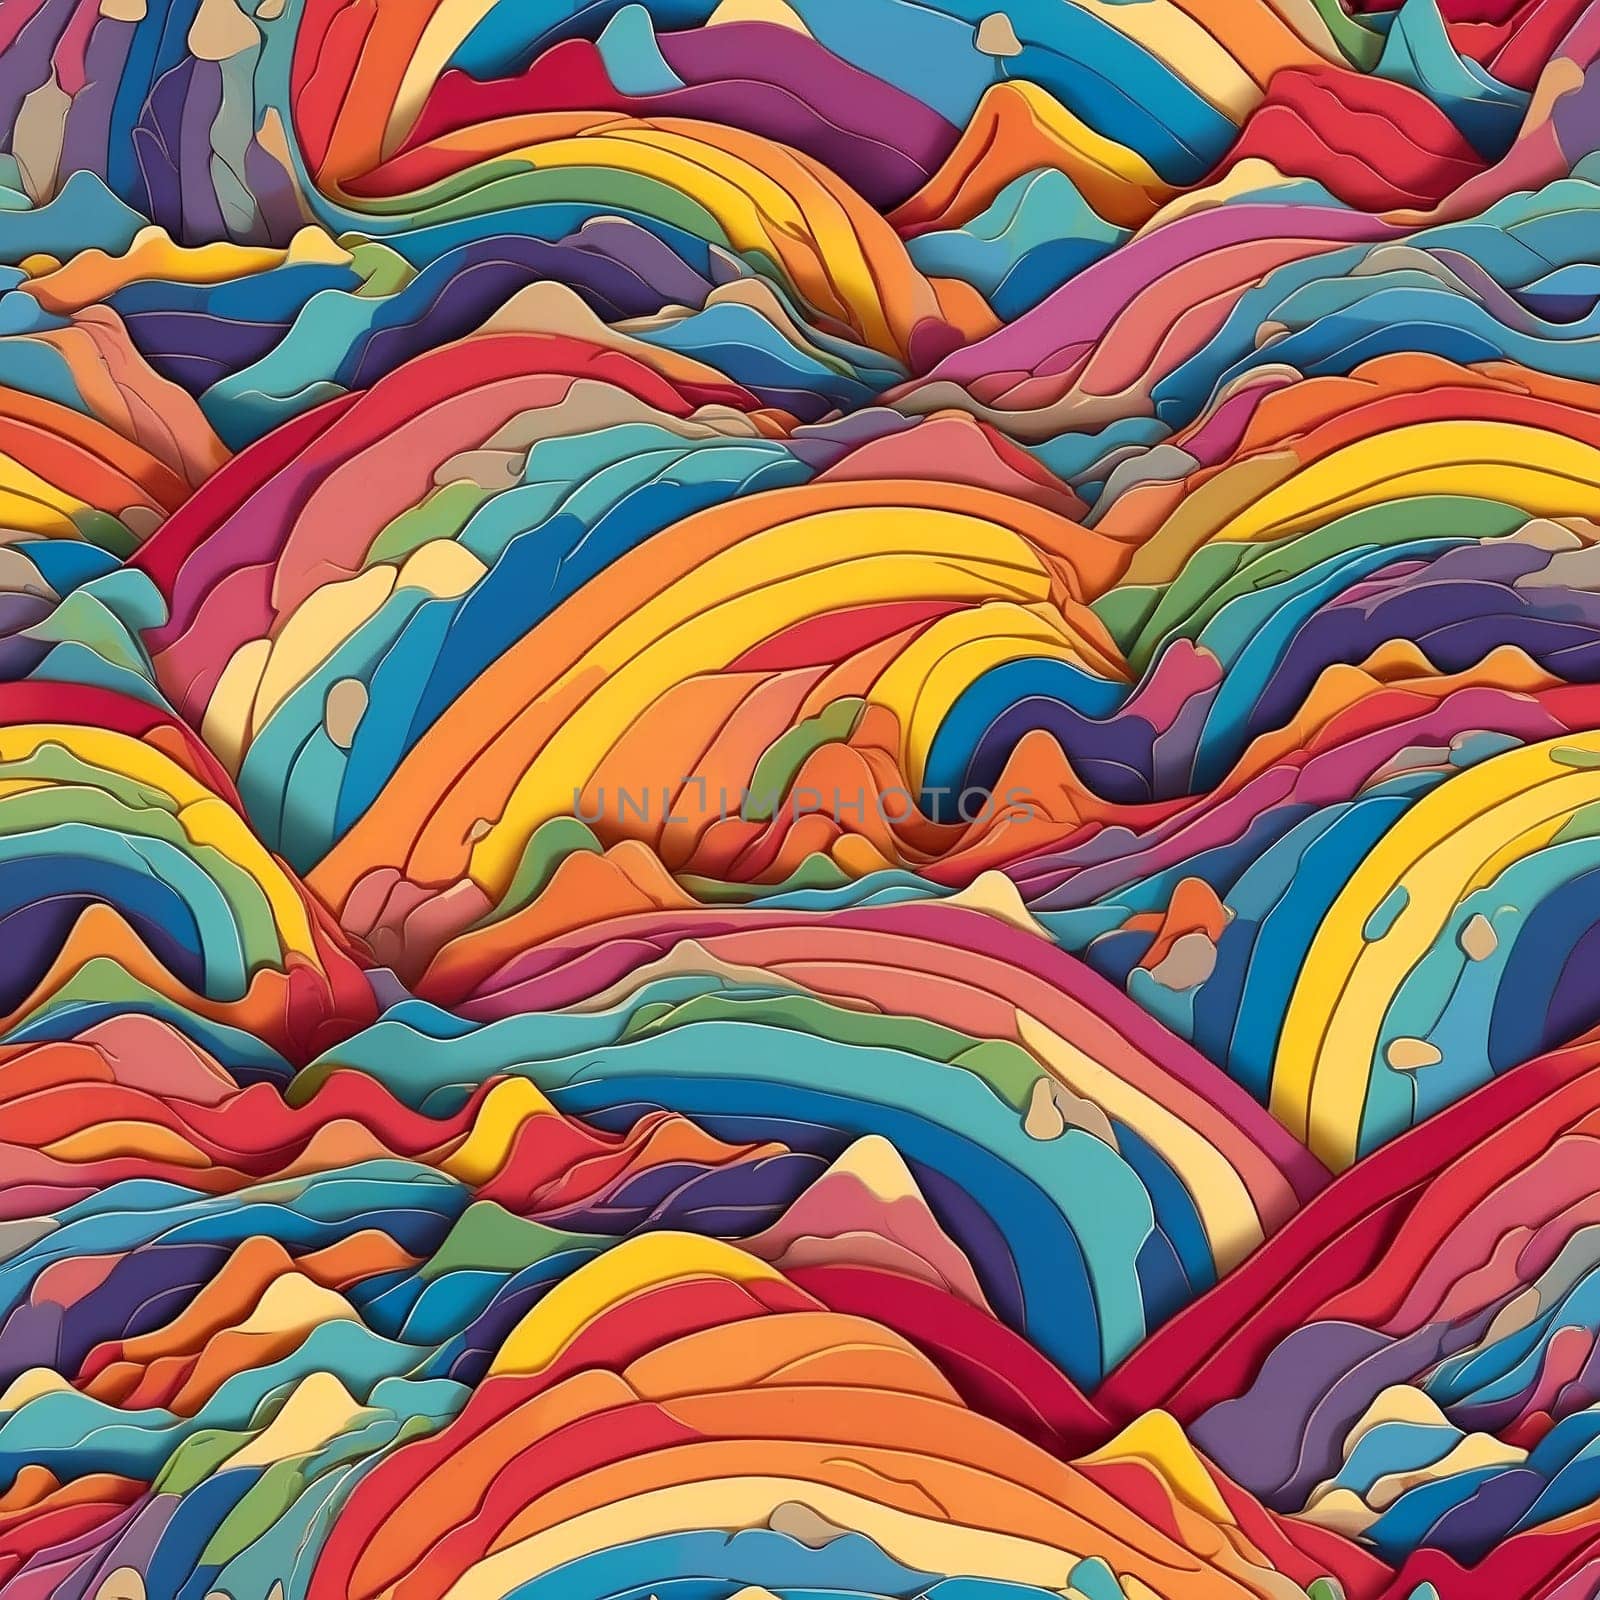 A vibrant painting showcasing a lively wave of colors arranged in a seamless pattern.